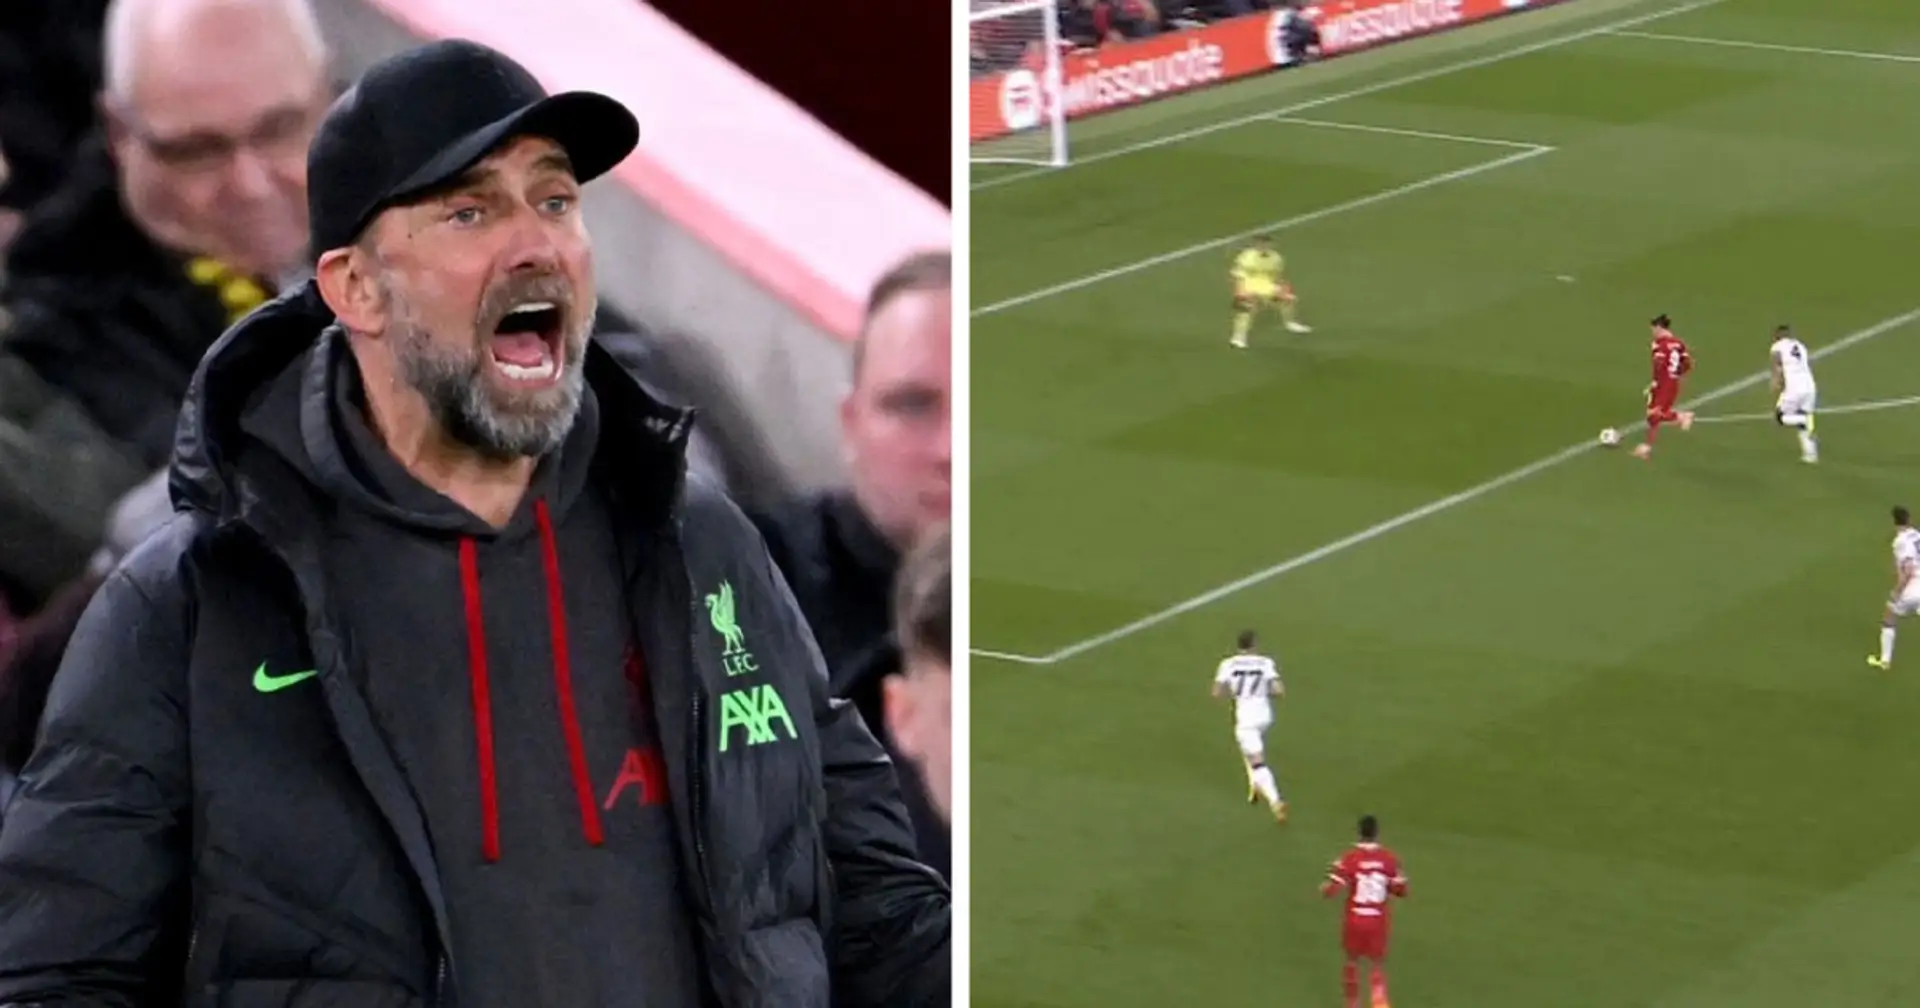 'This could have changed that game' - Liverpool fans left fuming after another big miss from Nunez